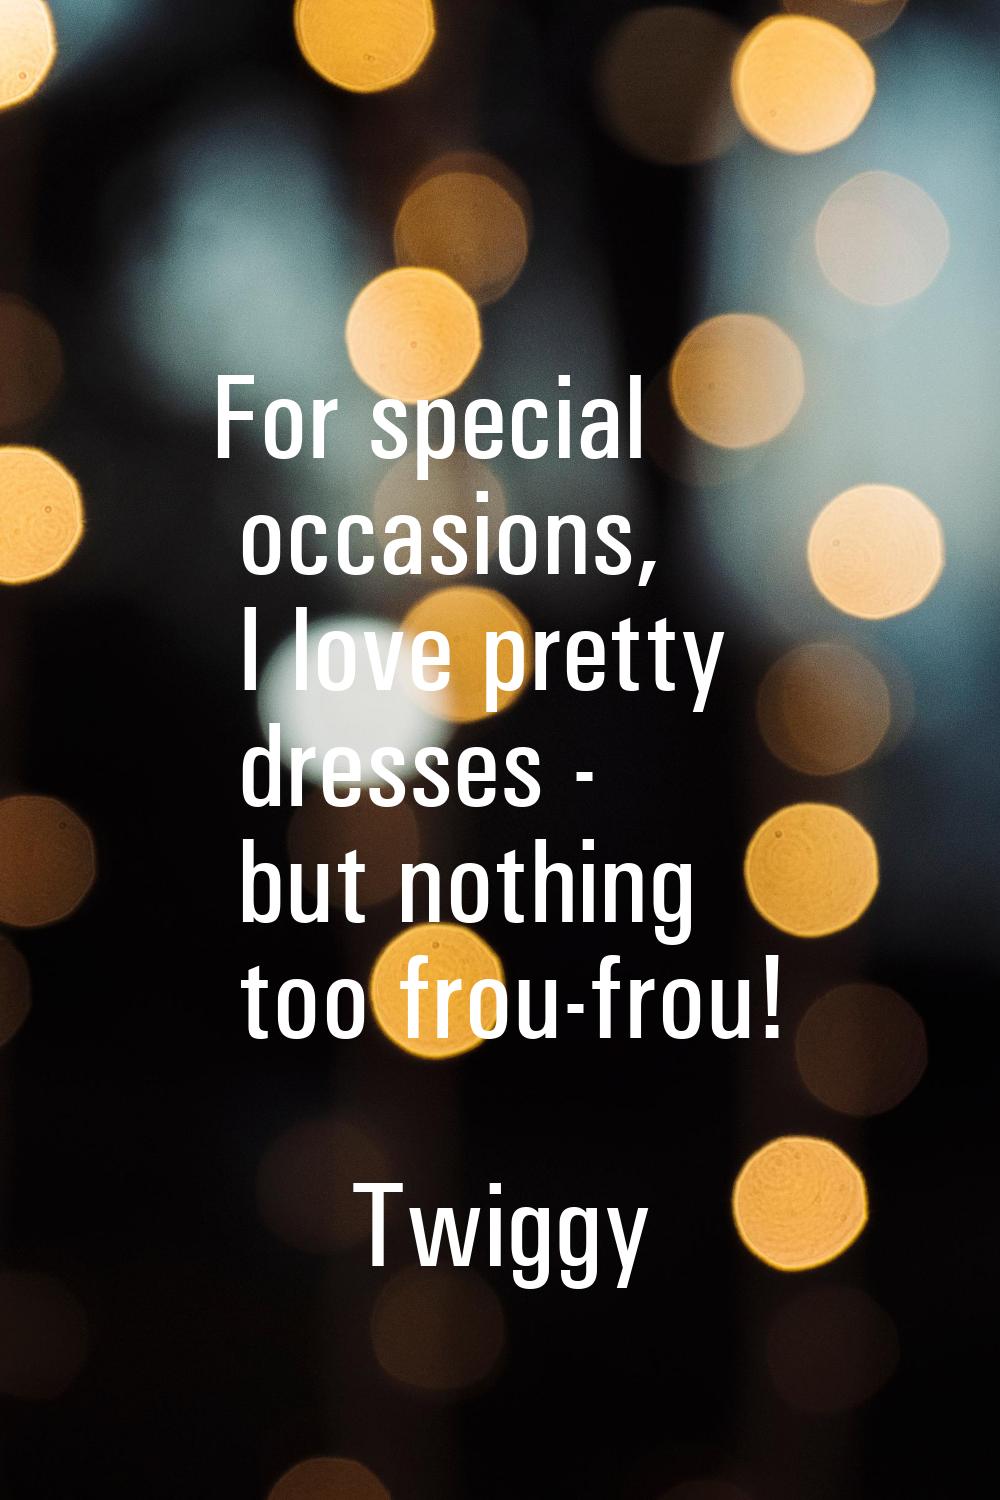 For special occasions, I love pretty dresses - but nothing too frou-frou!